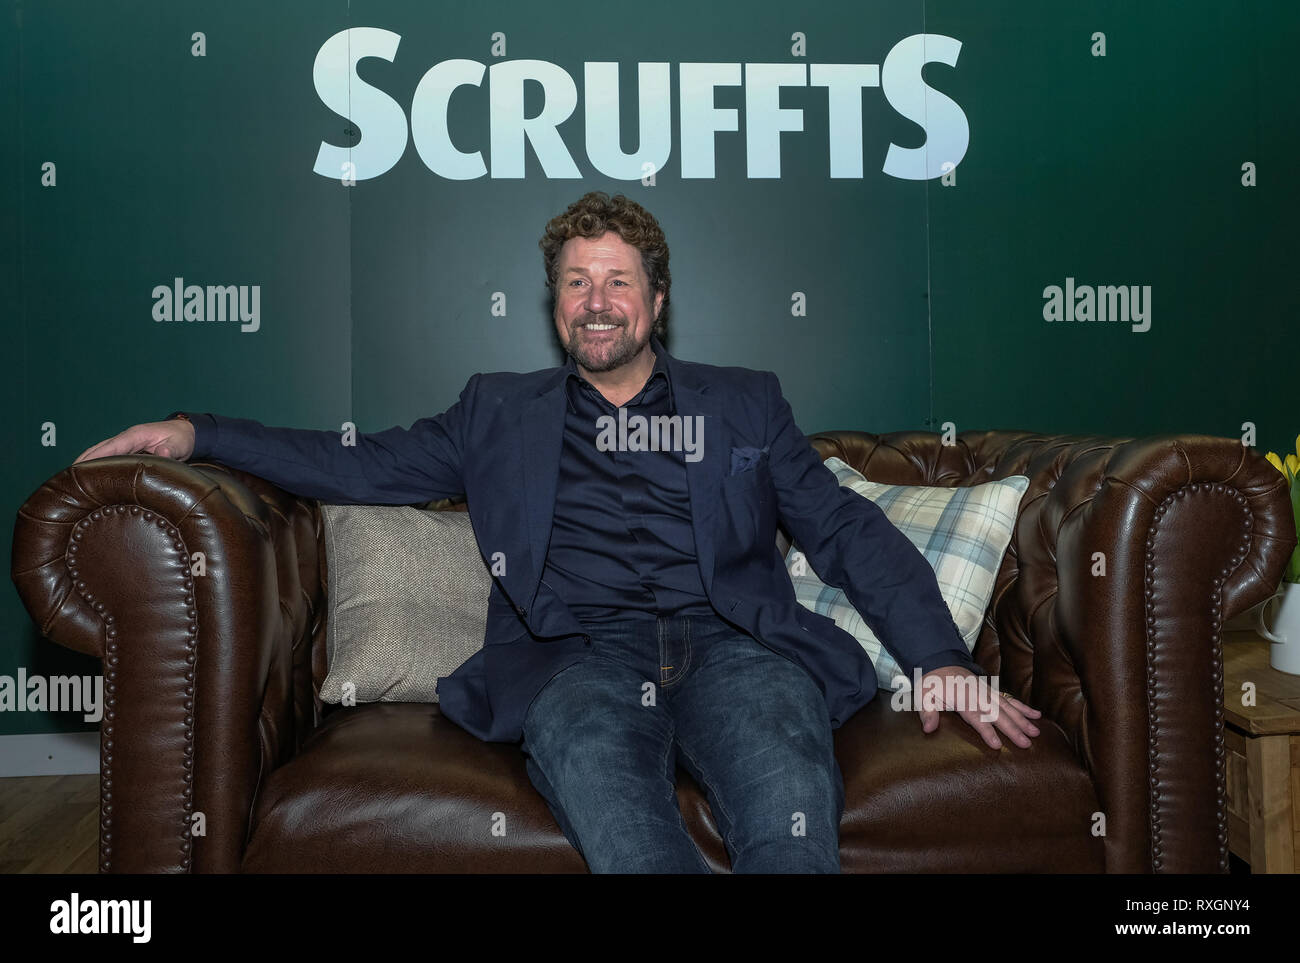 Birmingham, UK. 9th March 2019.  Crufts Dog Show....Singer Michael Ball priorto taking up his role as chief judge for Scruffs competition, the best cross breed dog, at this years Crufts Dog Show.. Credit: charlie bryan/Alamy Live News Stock Photo